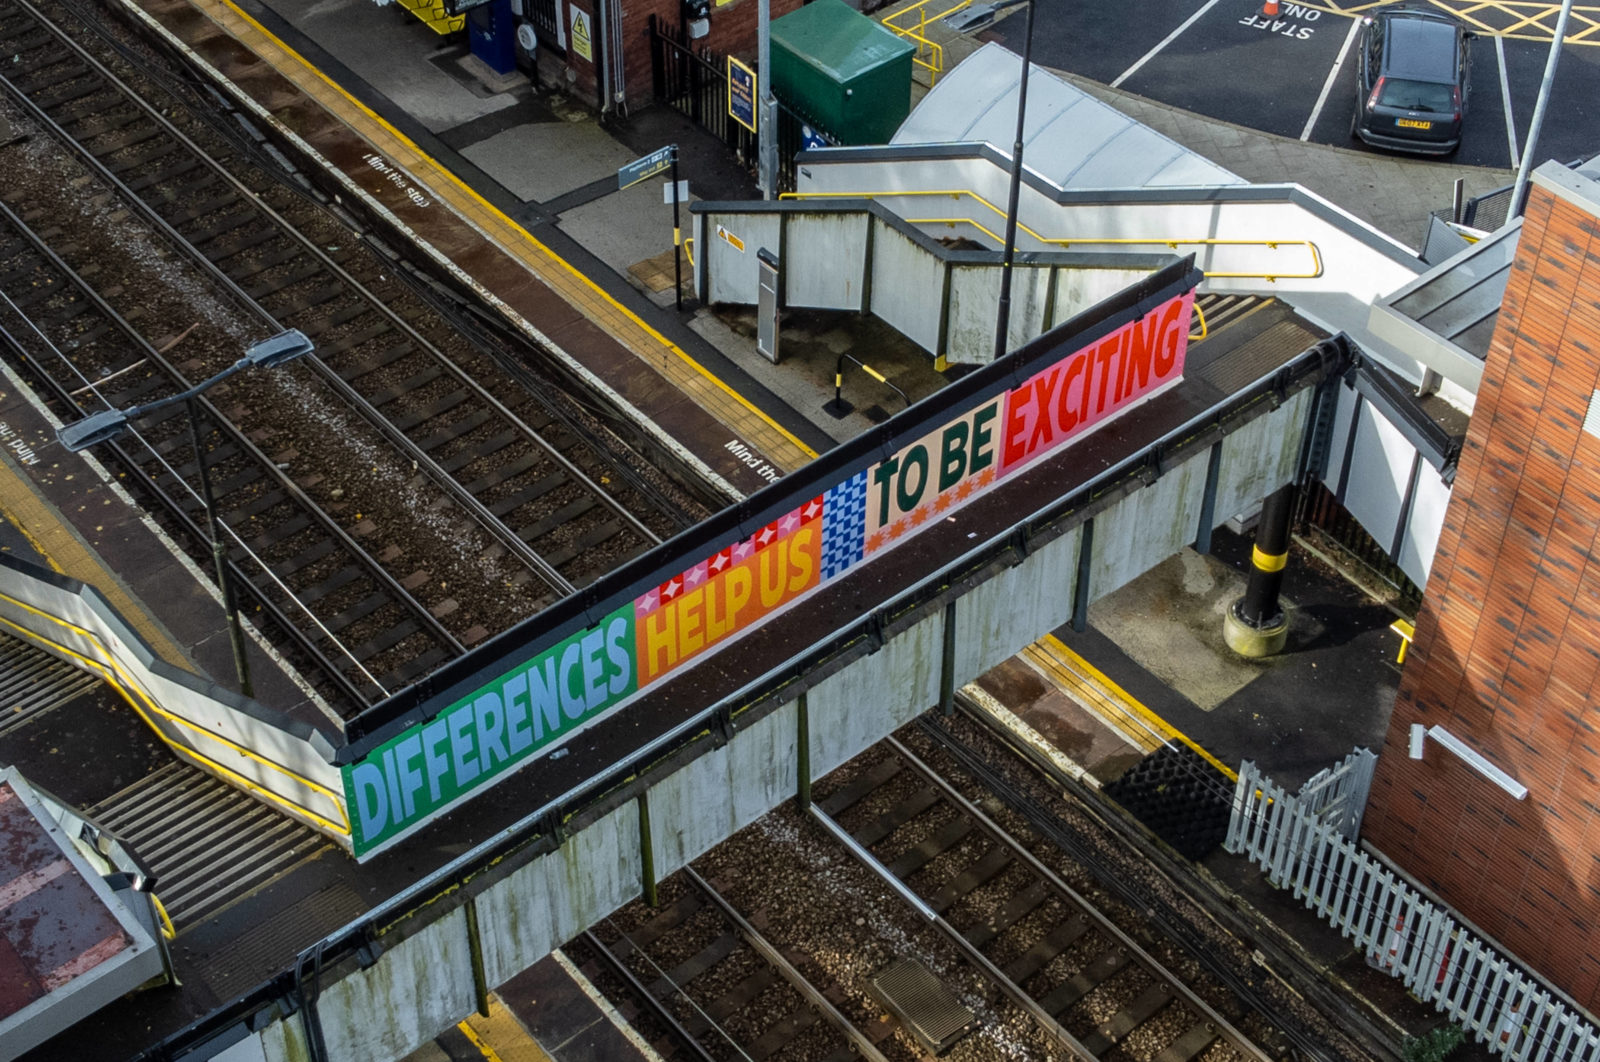 The mural is photographed at an arial view, it reads 'Differences help us to be exciting', surrounded by pattern and is painted on a train station bridge.